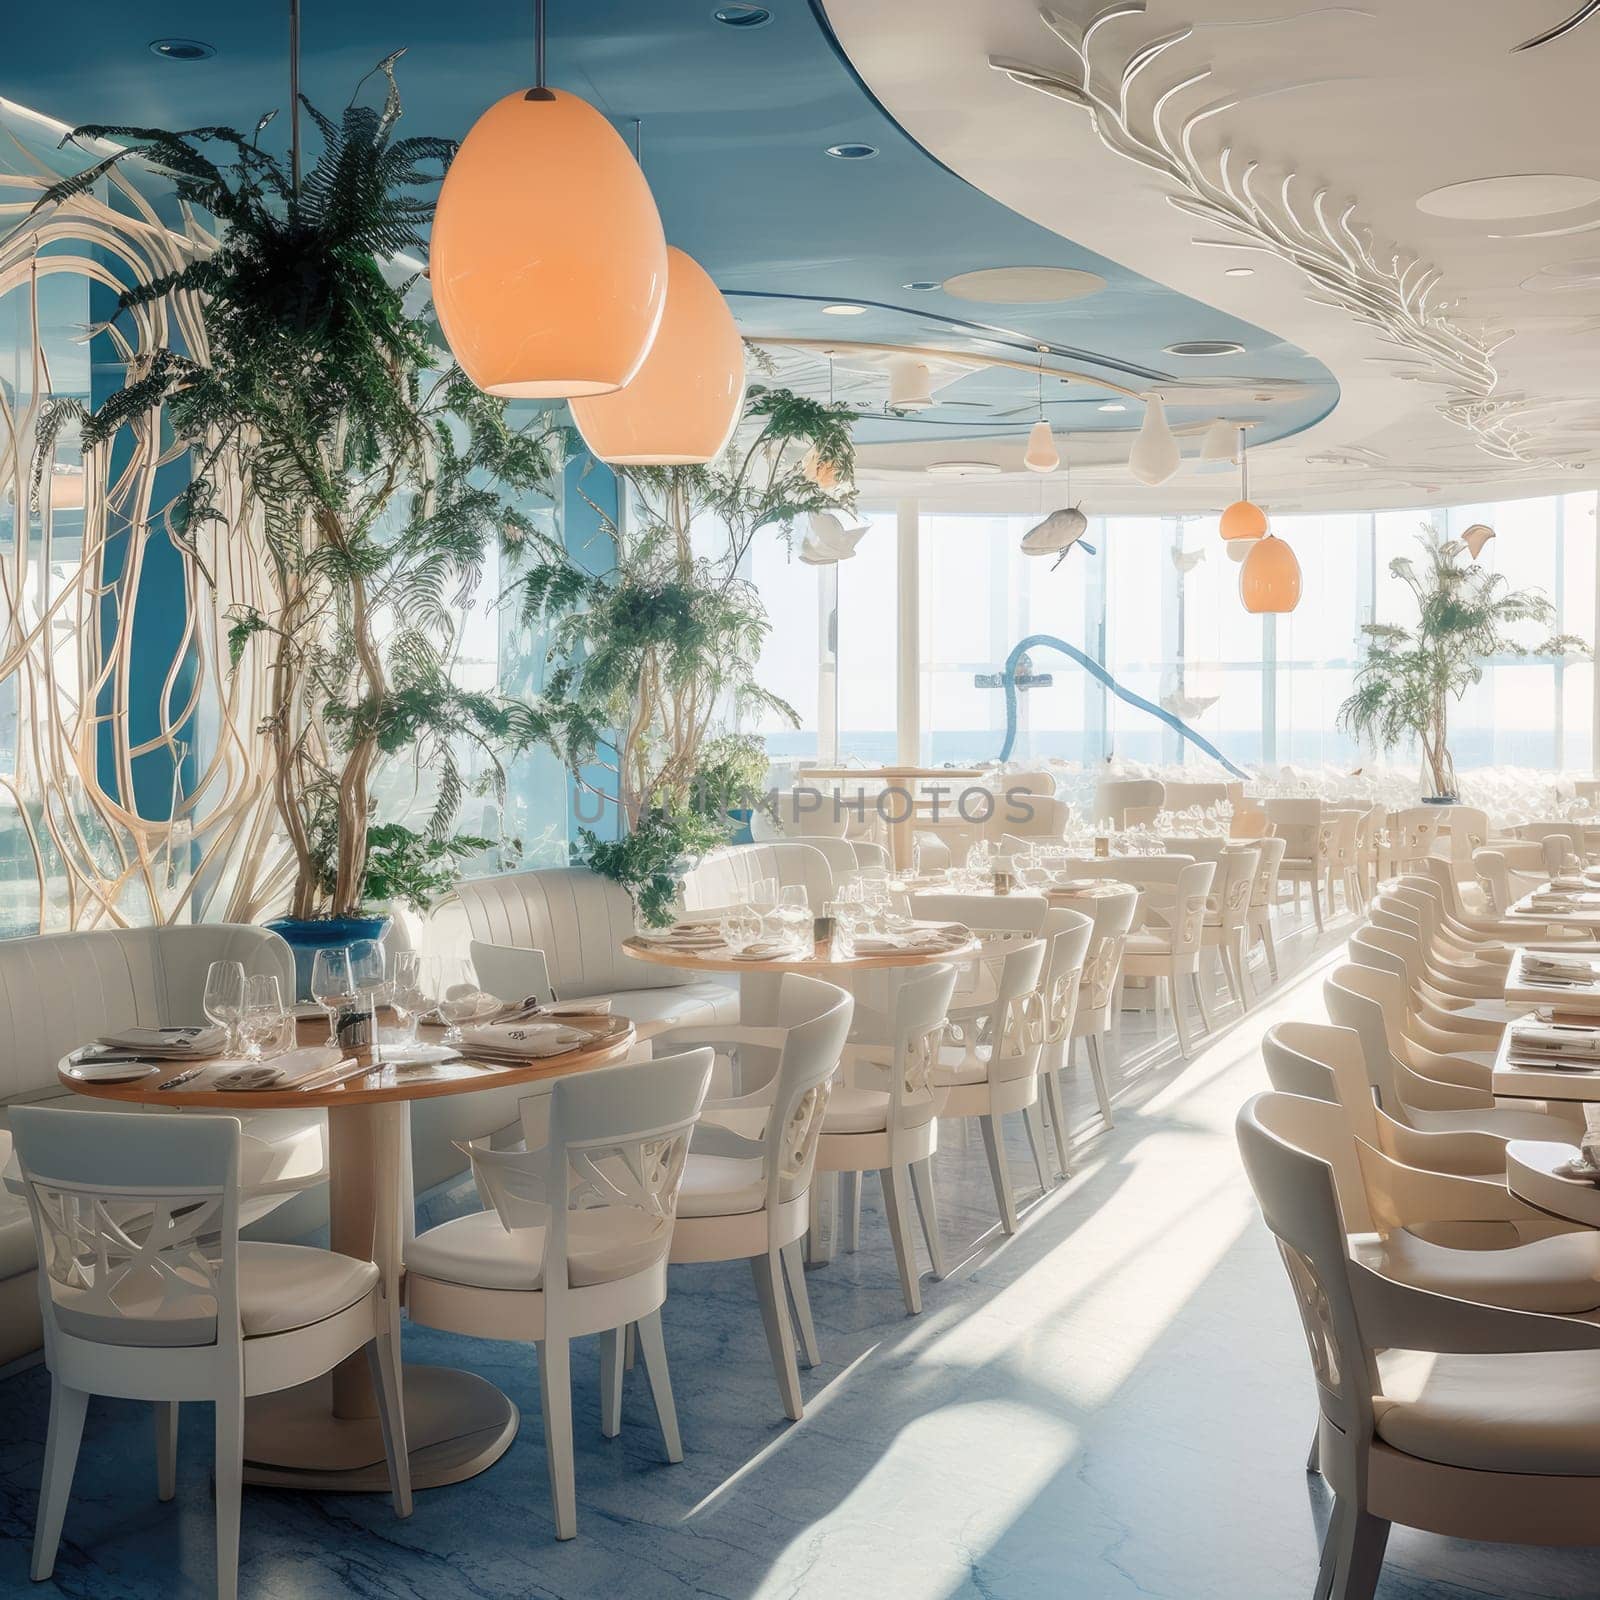 The interior of the seafood restaurant. There is no one